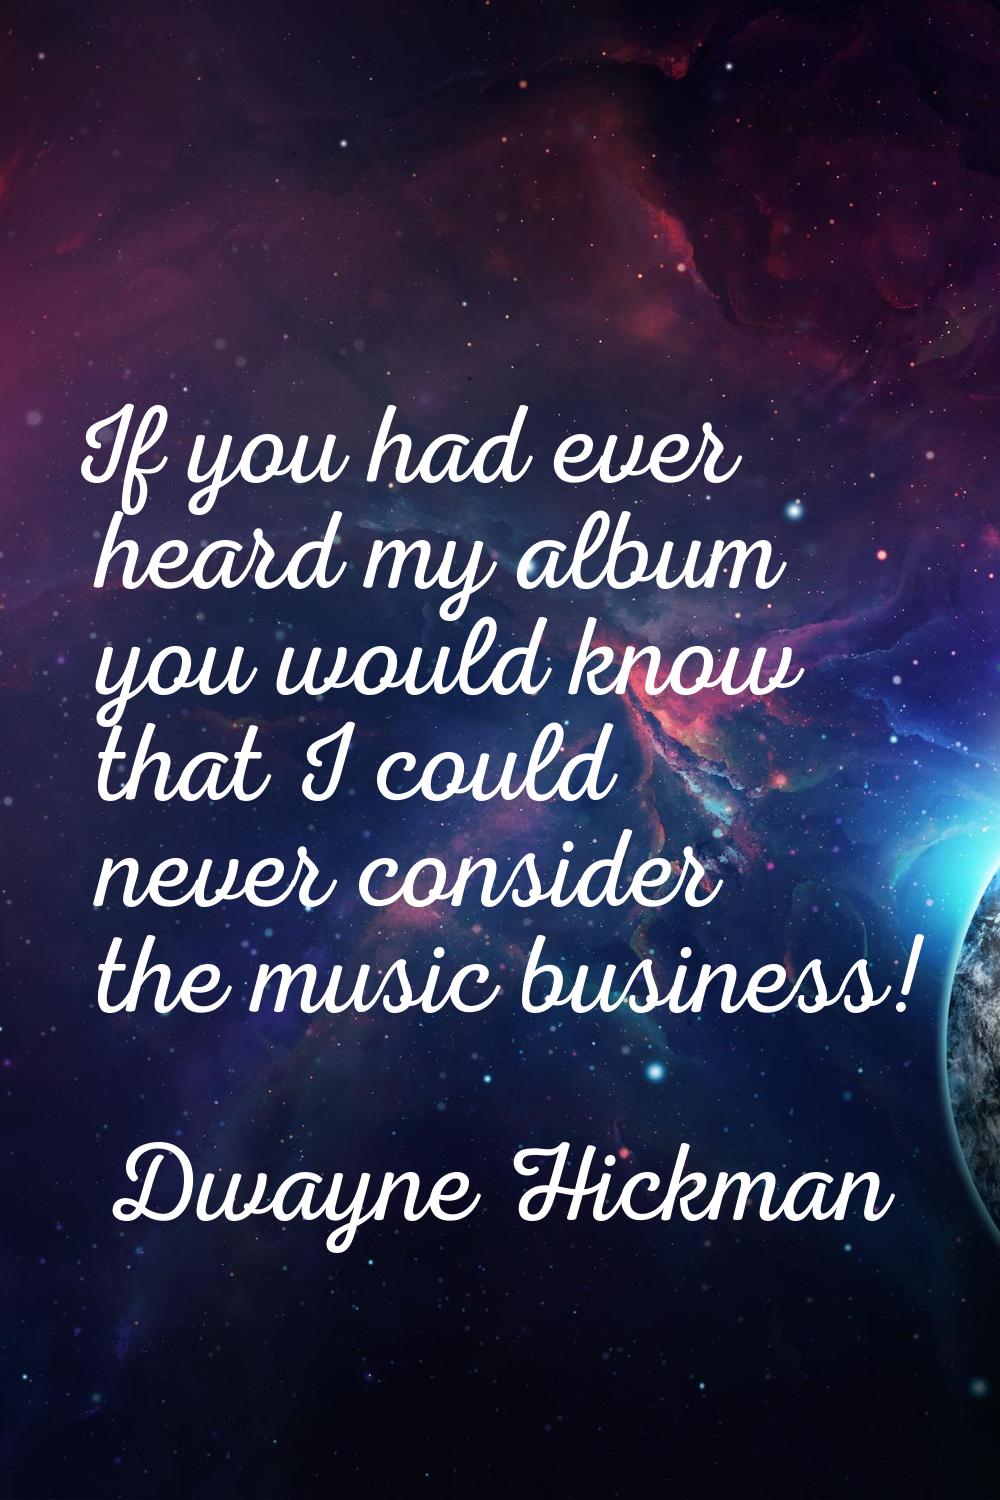 If you had ever heard my album you would know that I could never consider the music business!